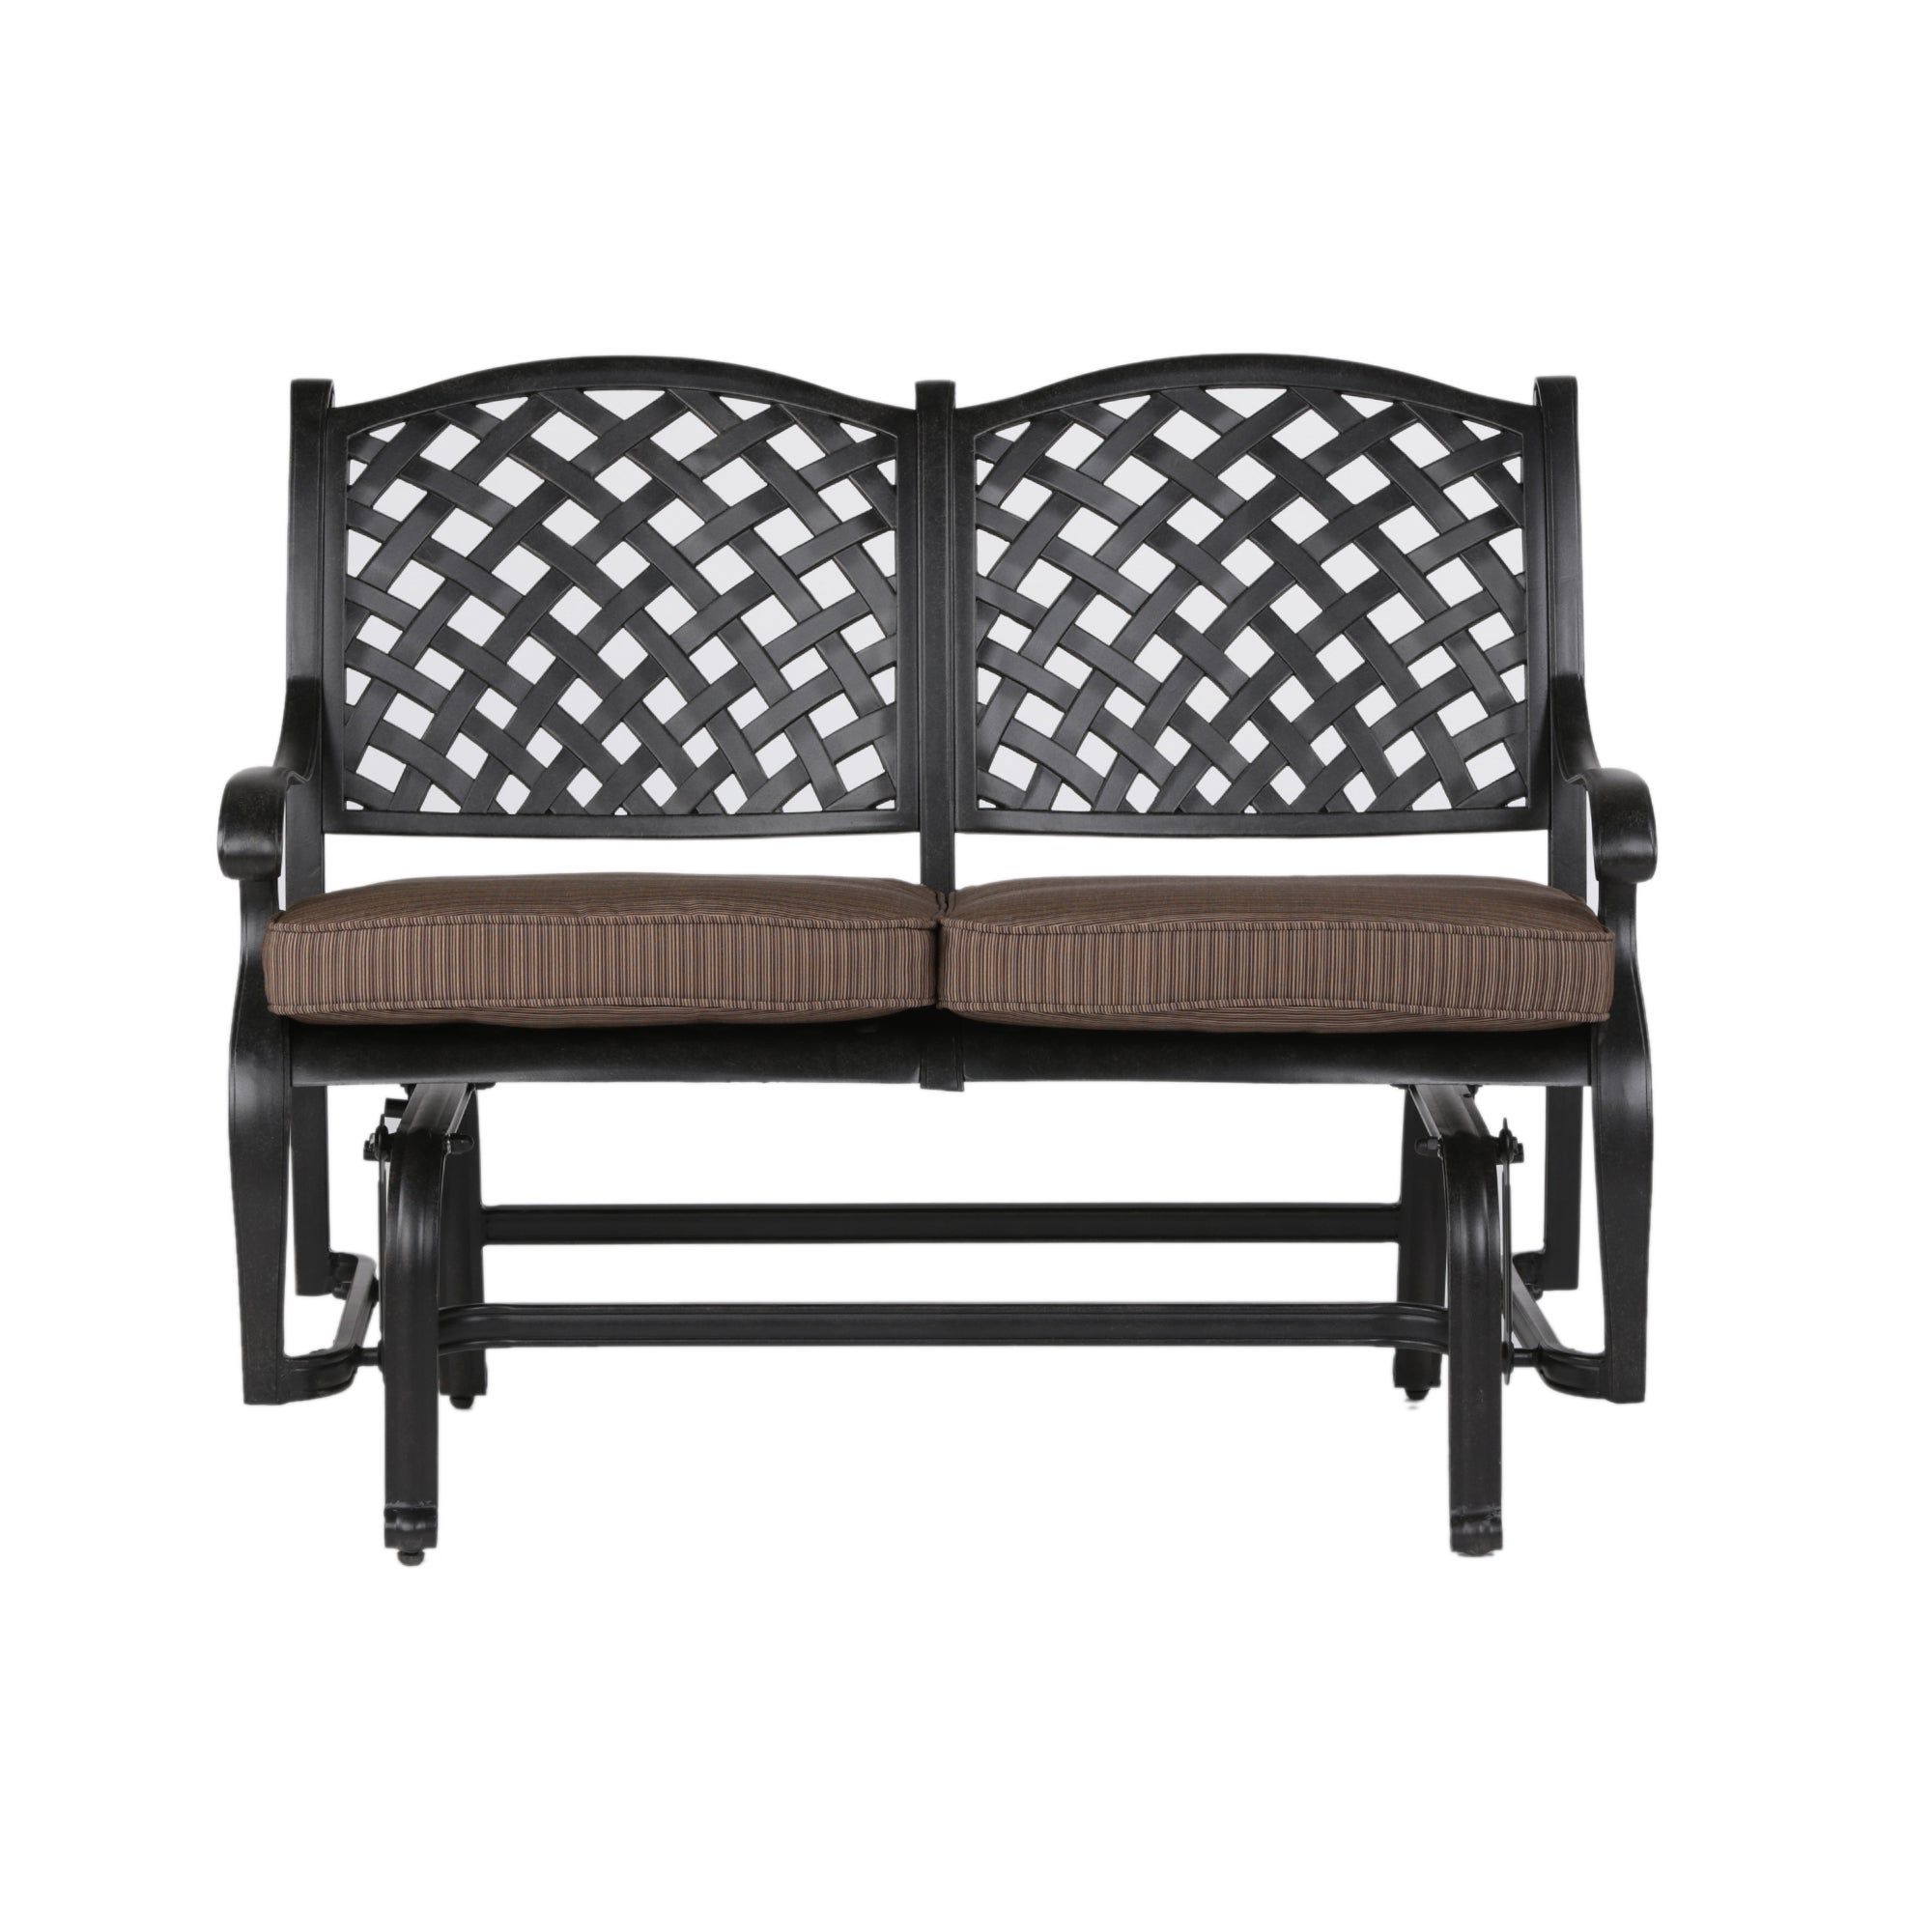 South Ponto Aluminum Bench Glider With Cushion With Regard To Latest Cushioned Glider Benches With Cushions (View 10 of 30)